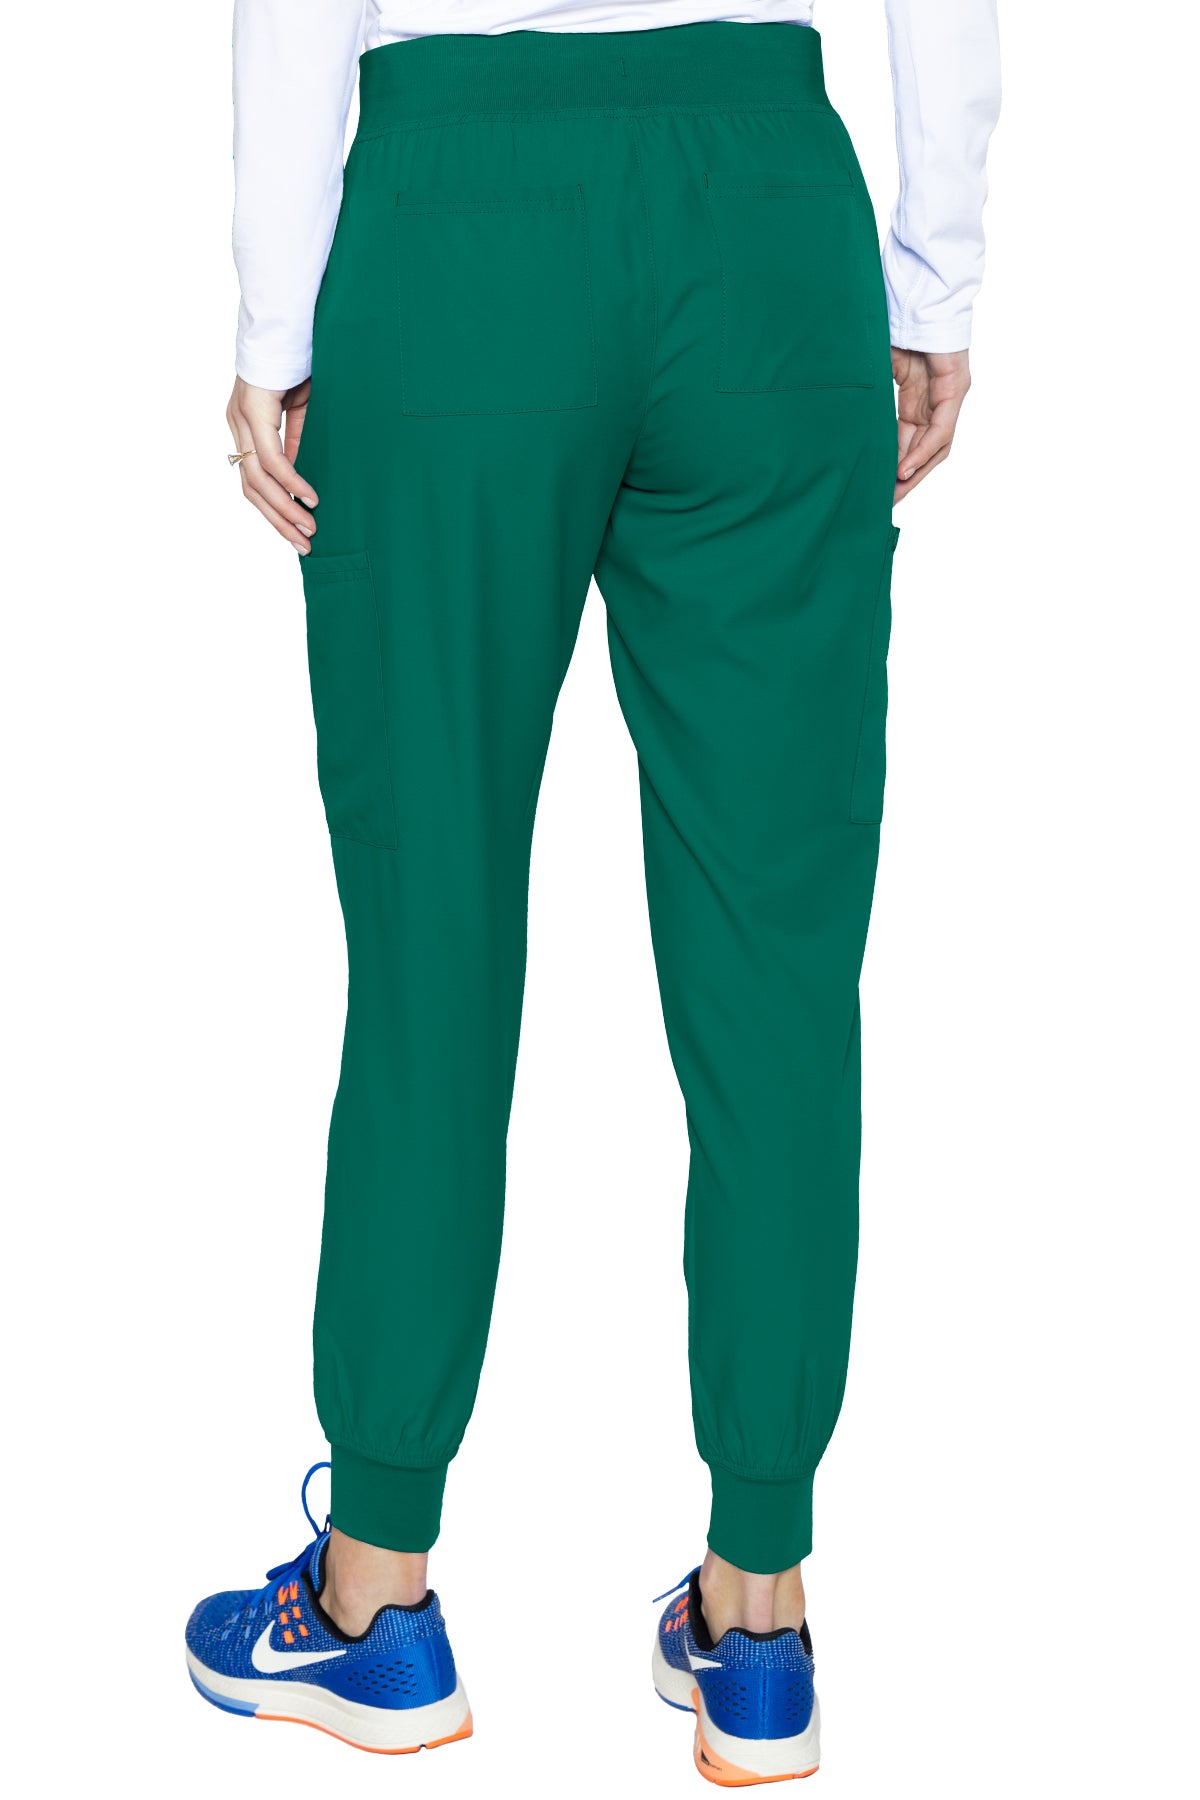 Med Couture 2711 Insight Jogger Pant Hunter Back